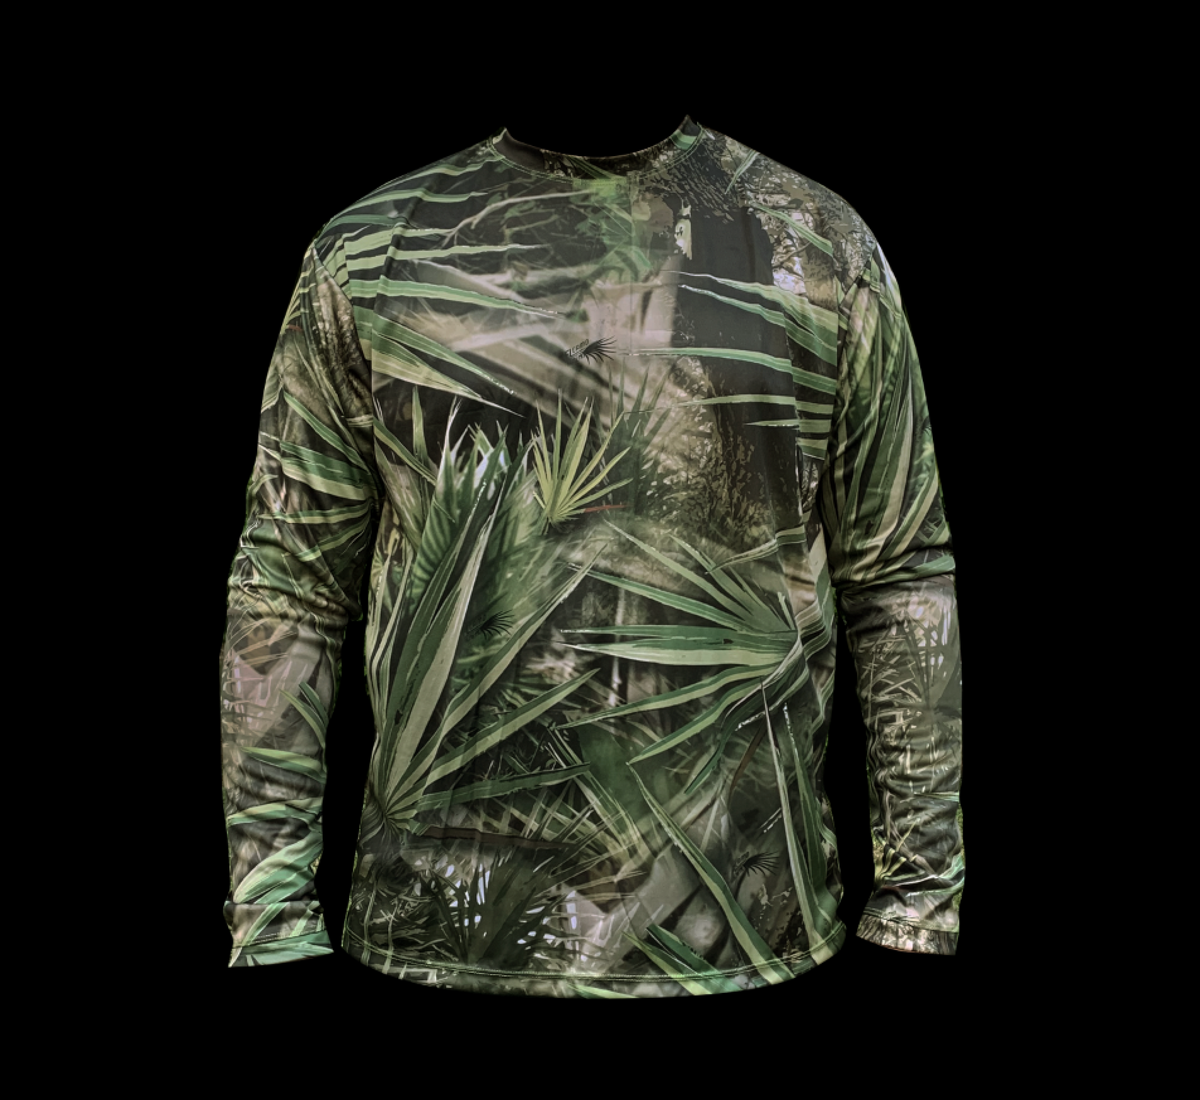 Russell Outdoors™ Camo Performance Long Sleeve Shirt - Men's**  (Restrictions Apply - see description)